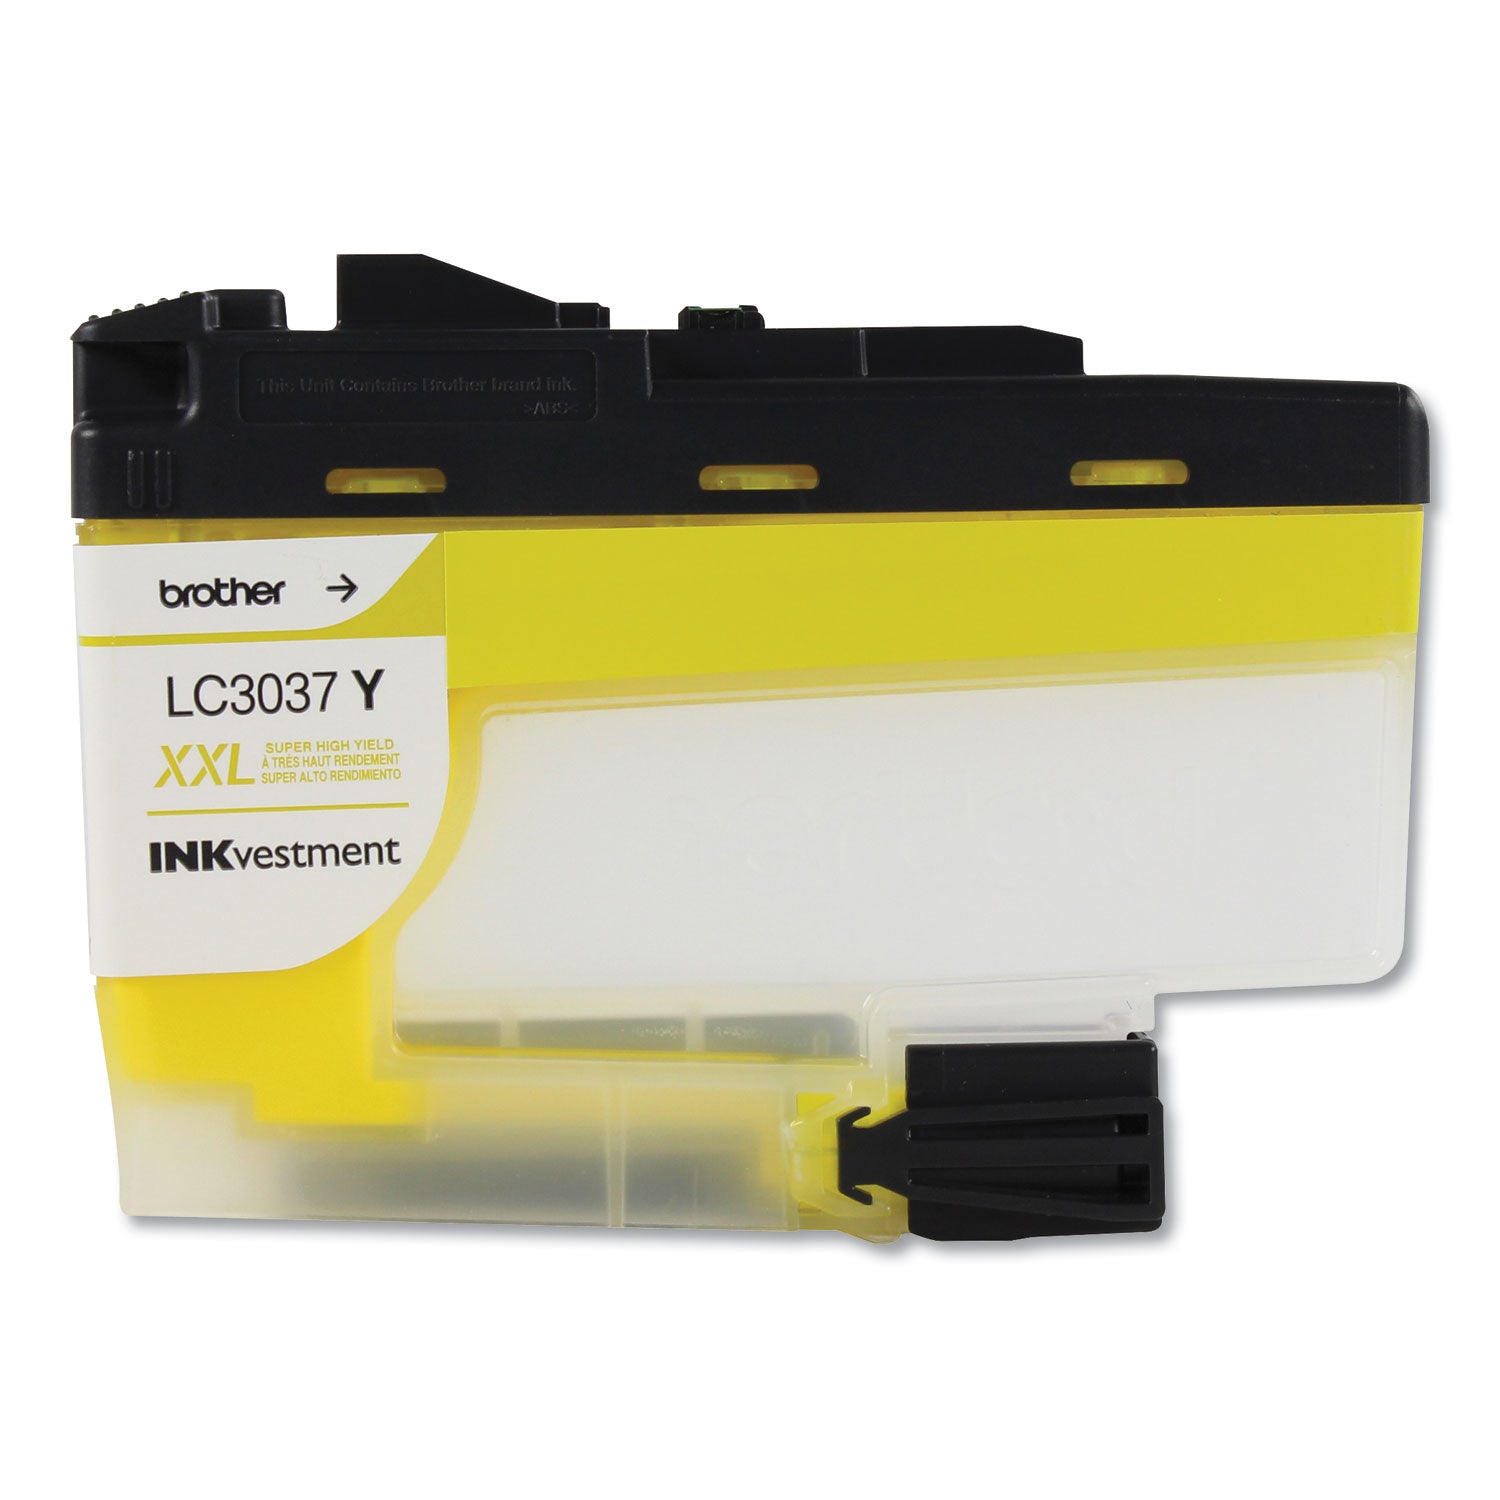 lc3037y-inkvestment-super-high-yield-ink-1500-page-yield-yellow_brtlc3037y - 3